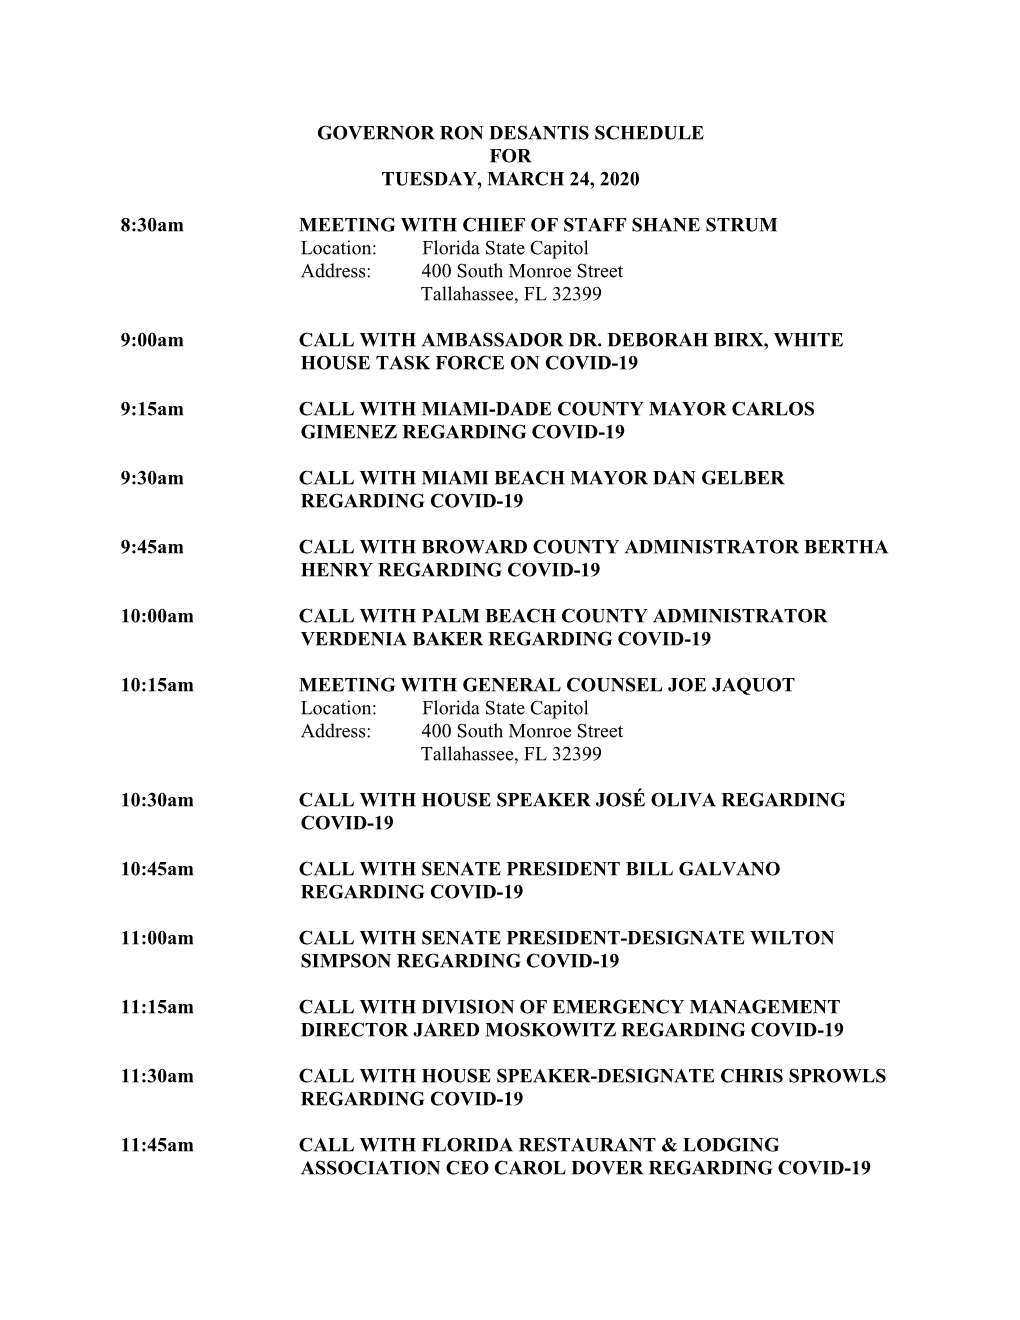 Governor Ron Desantis Schedule for Tuesday, March 24, 2020